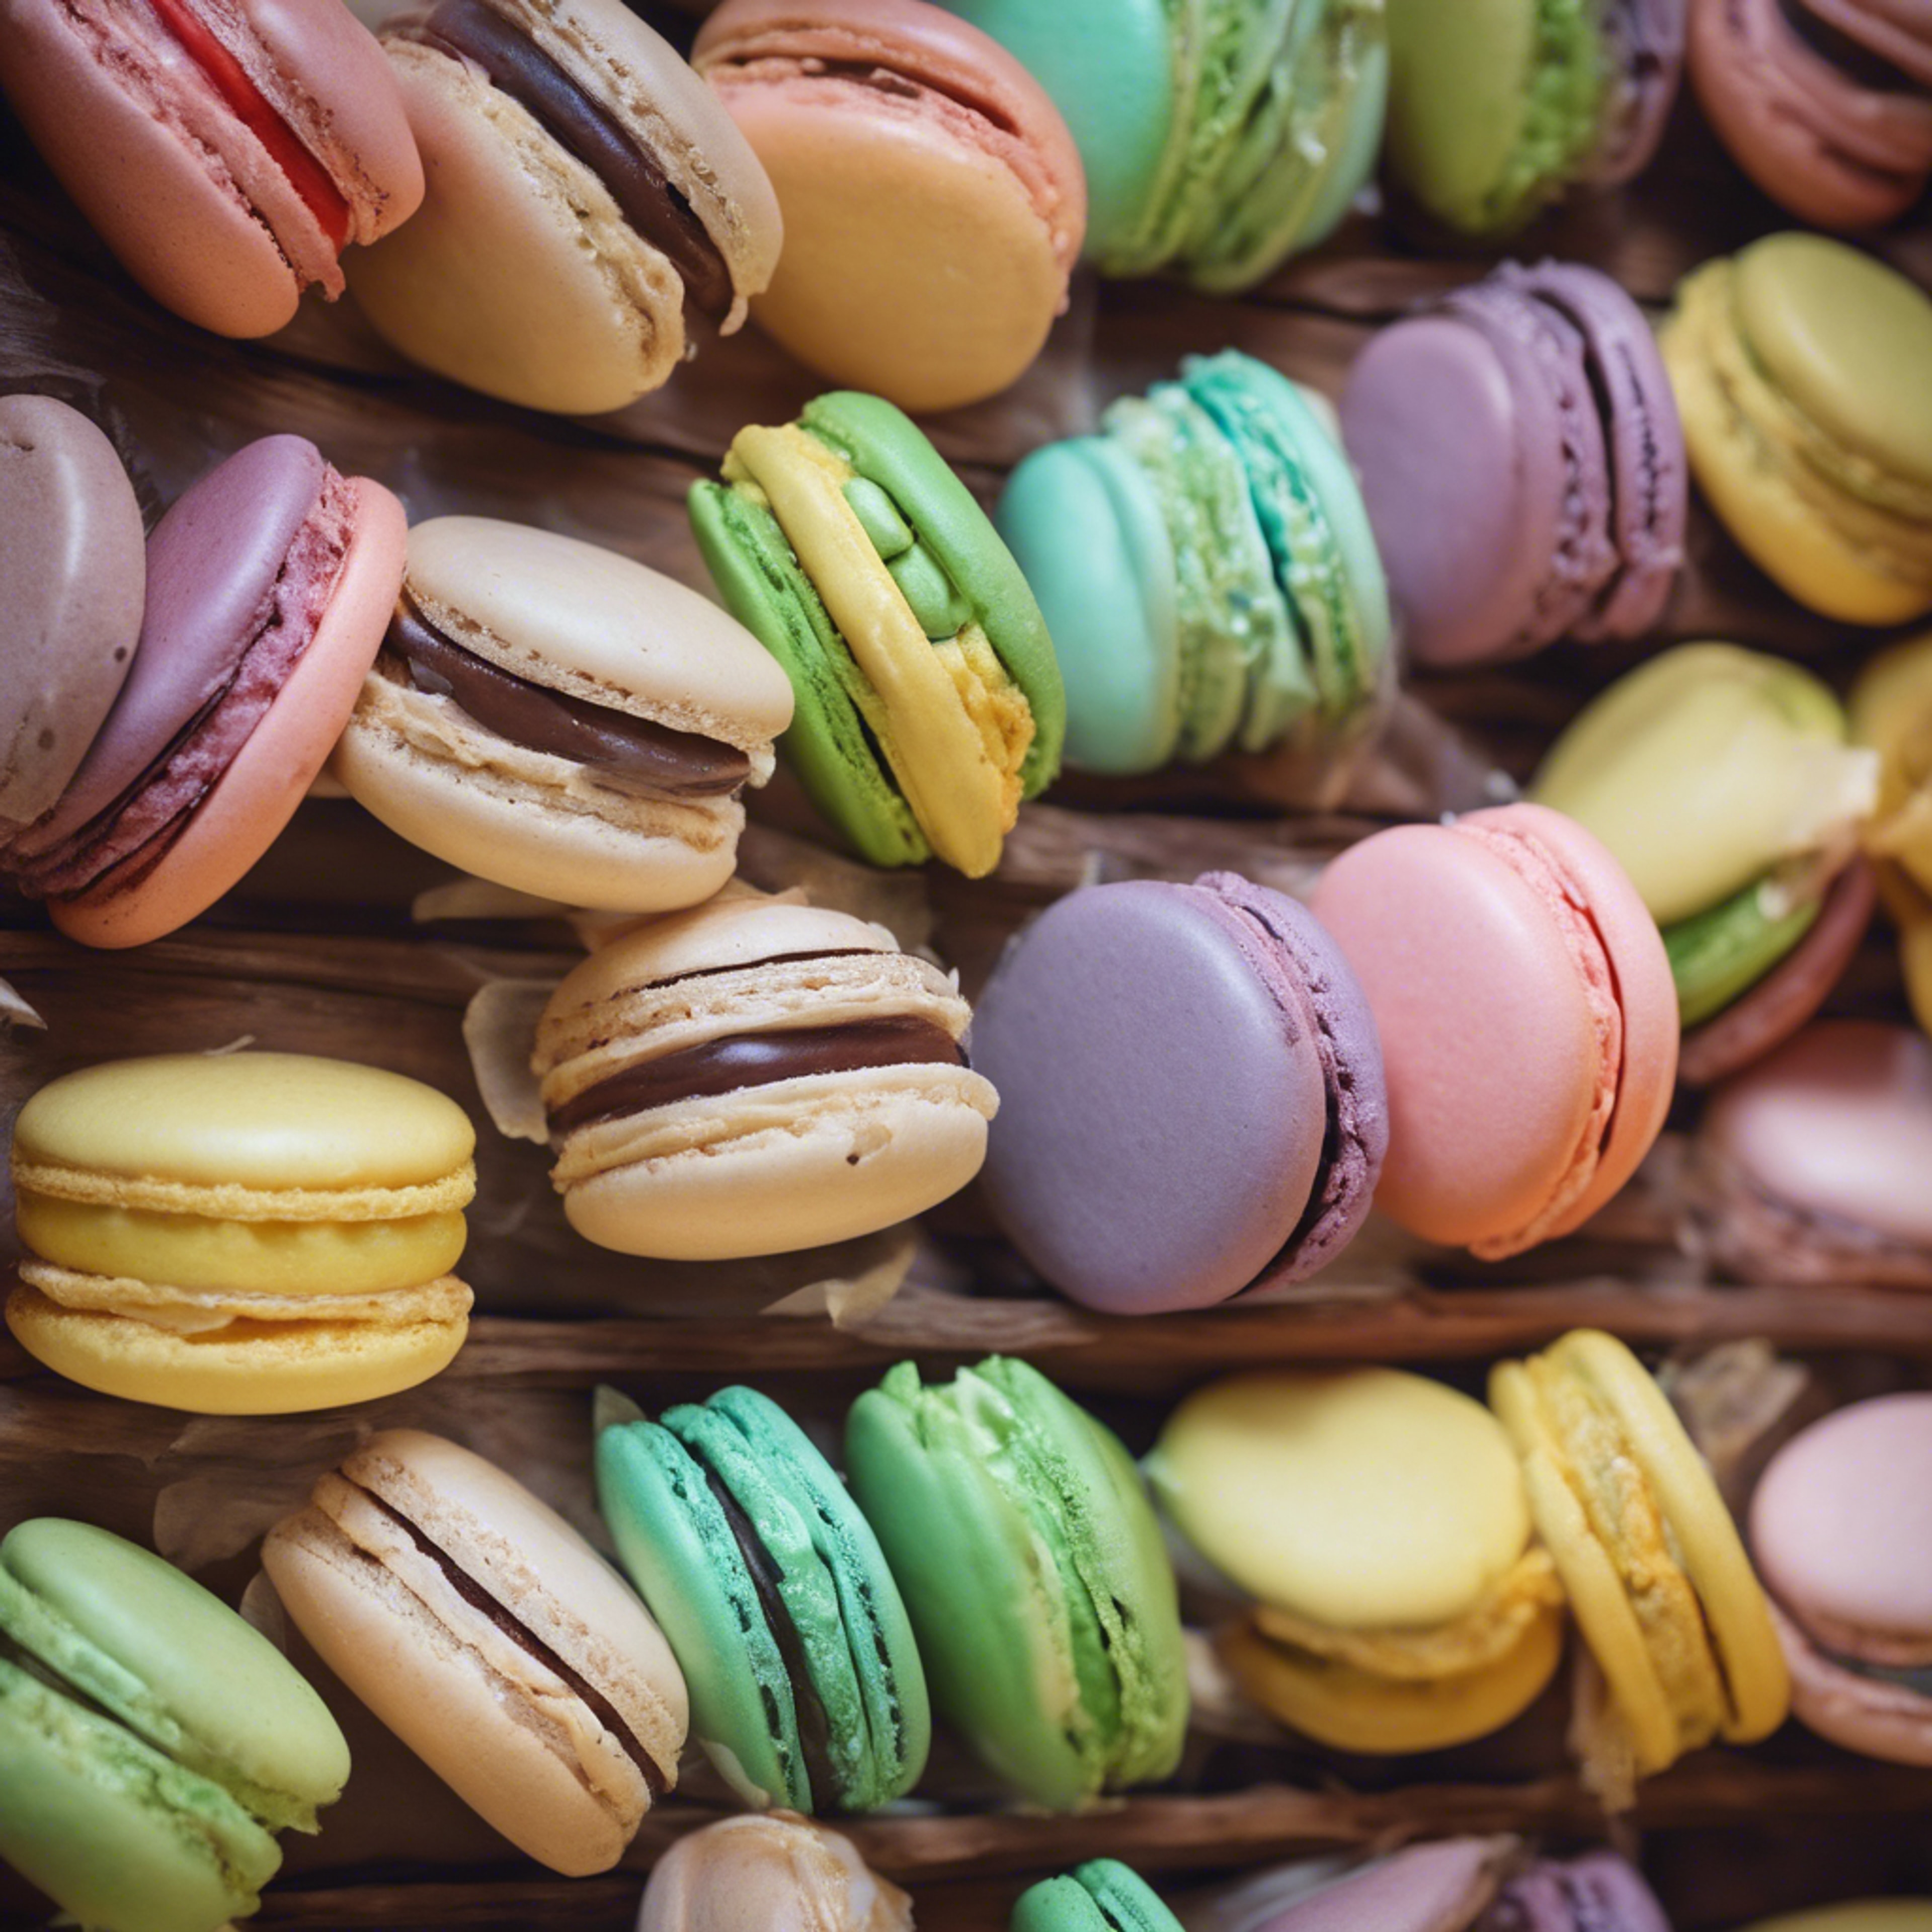 An old-fashioned nostalgic bakery displaying various colorful macarons. Wallpaper[50adf48075104113b6f7]